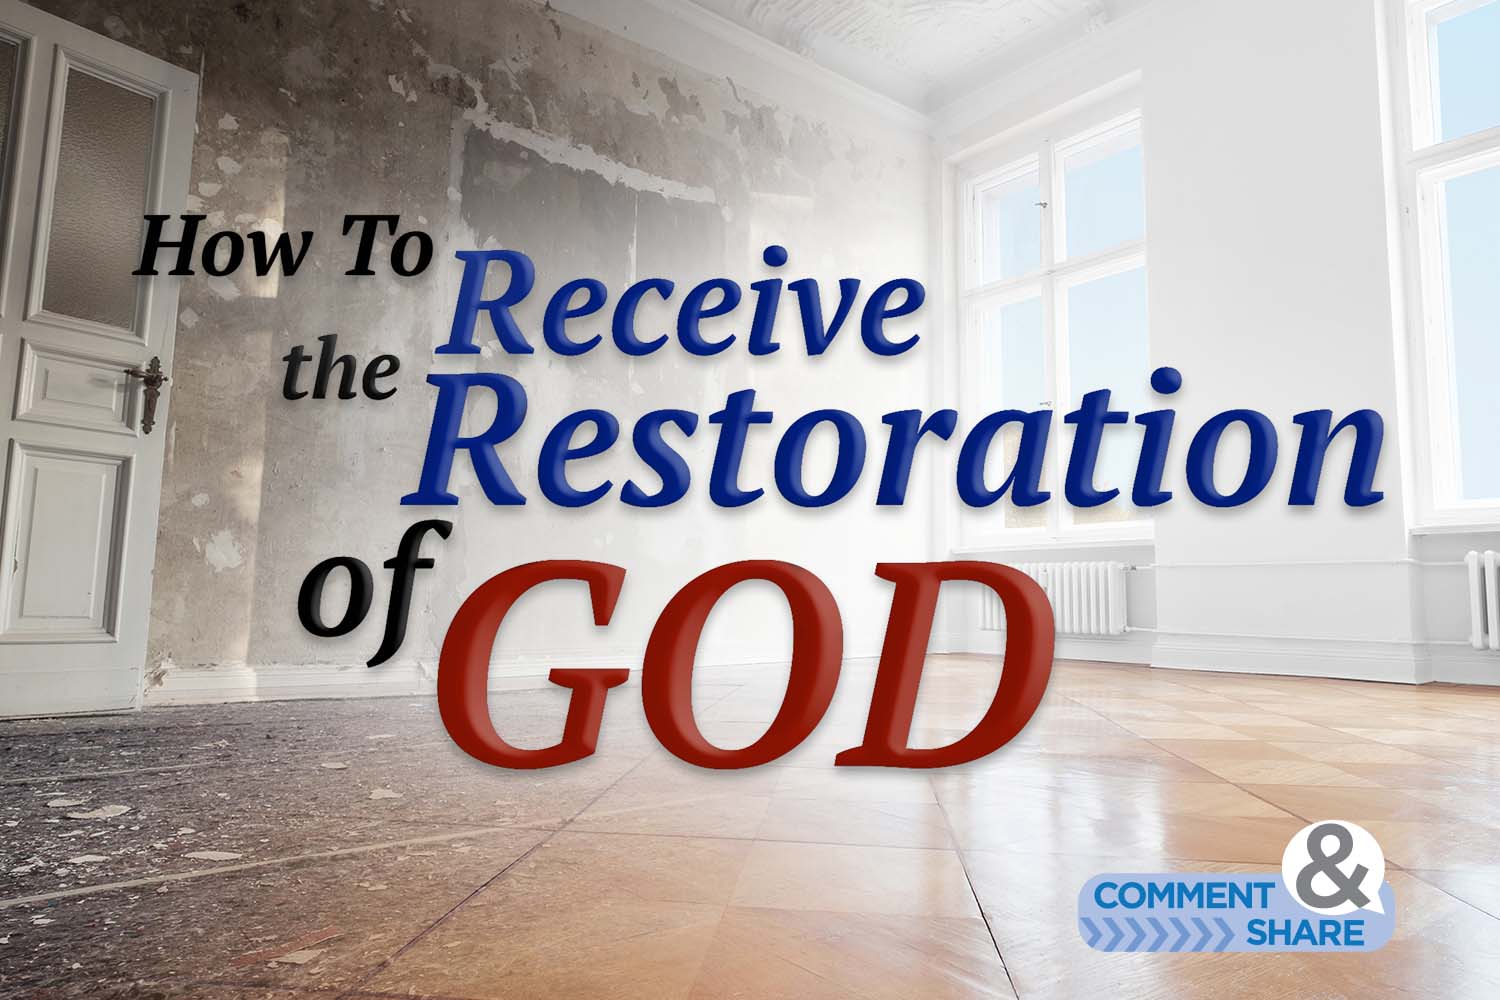 How To Receive the Restoration of God